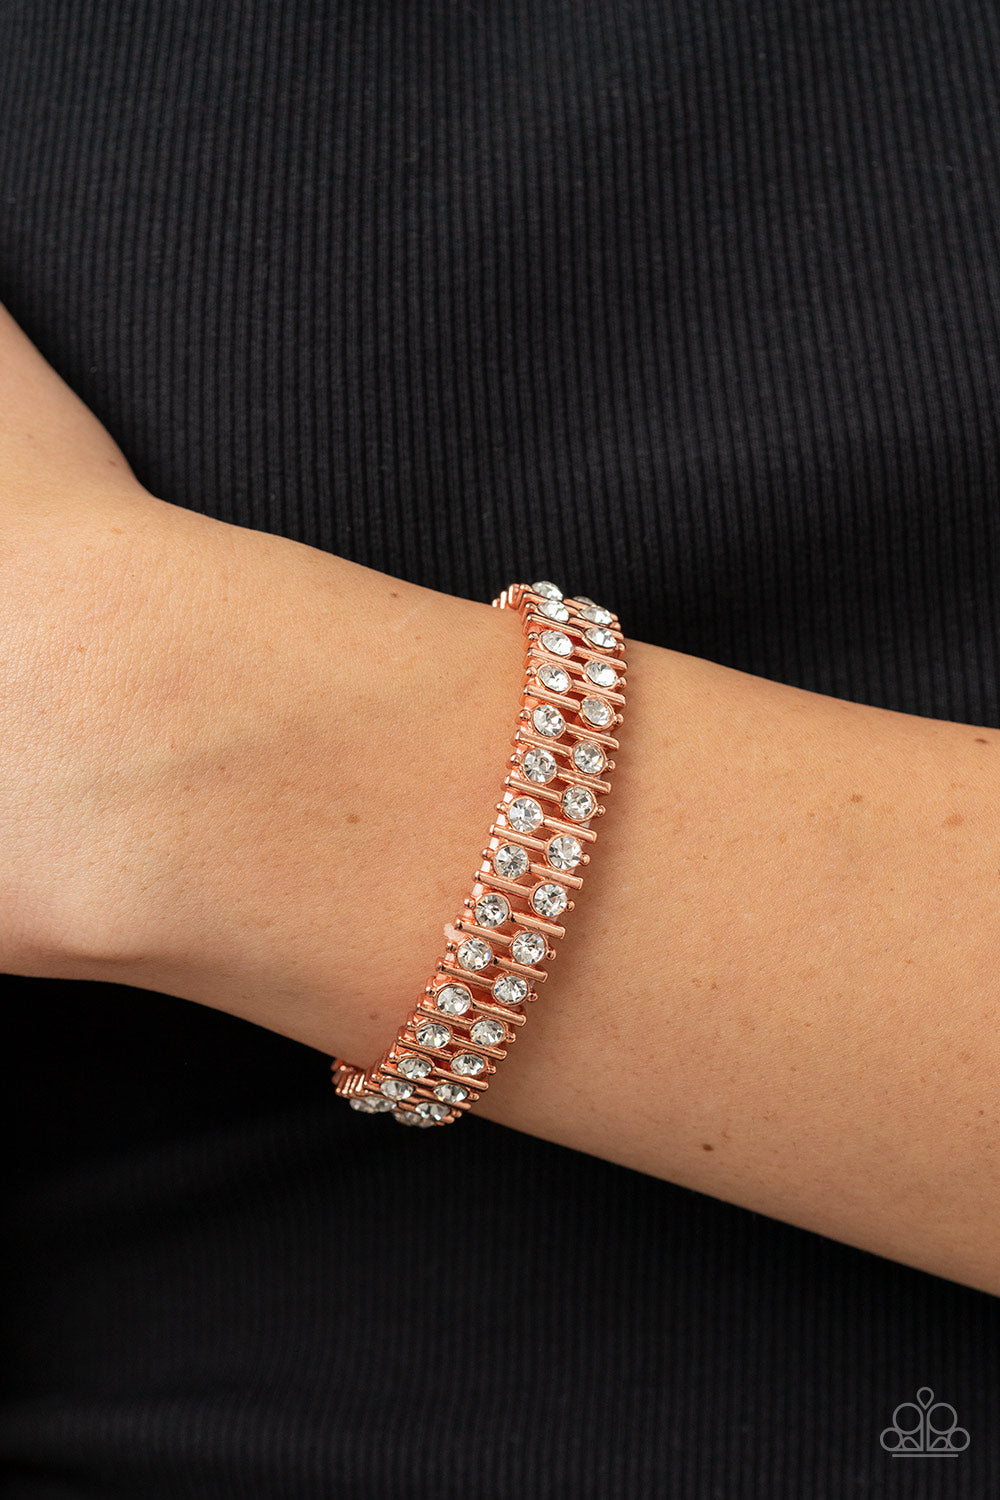 Paparazzi Accessories Generational Glimmer - Copper Attached to shiny copper bars, a staggered display of solitaire white rhinestones alternates along a stretchy band around the wrist for an unexpected pop of shimmer around the wrist. Sold as one individu